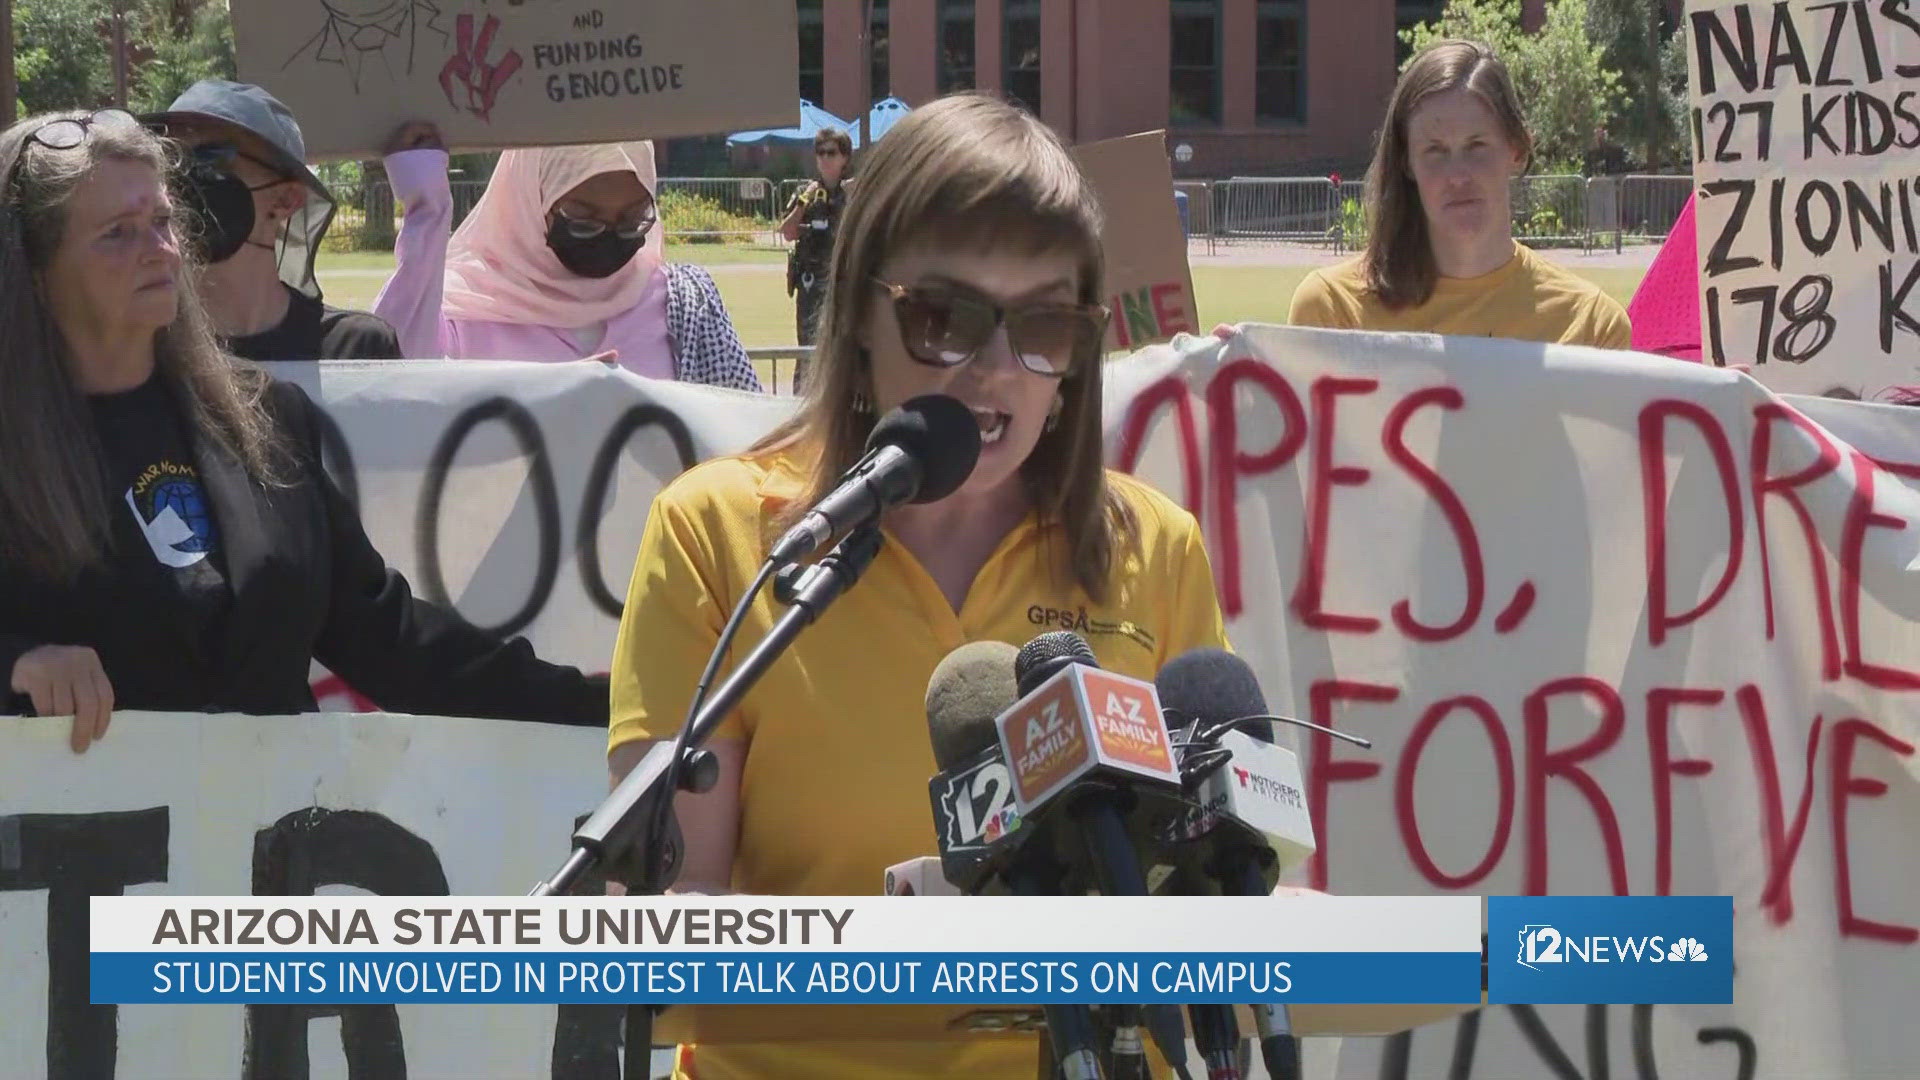 A pro-Palestinian protest on Arizona State University's Tempe campus was met with police response. Several students and staff were among those arrested.